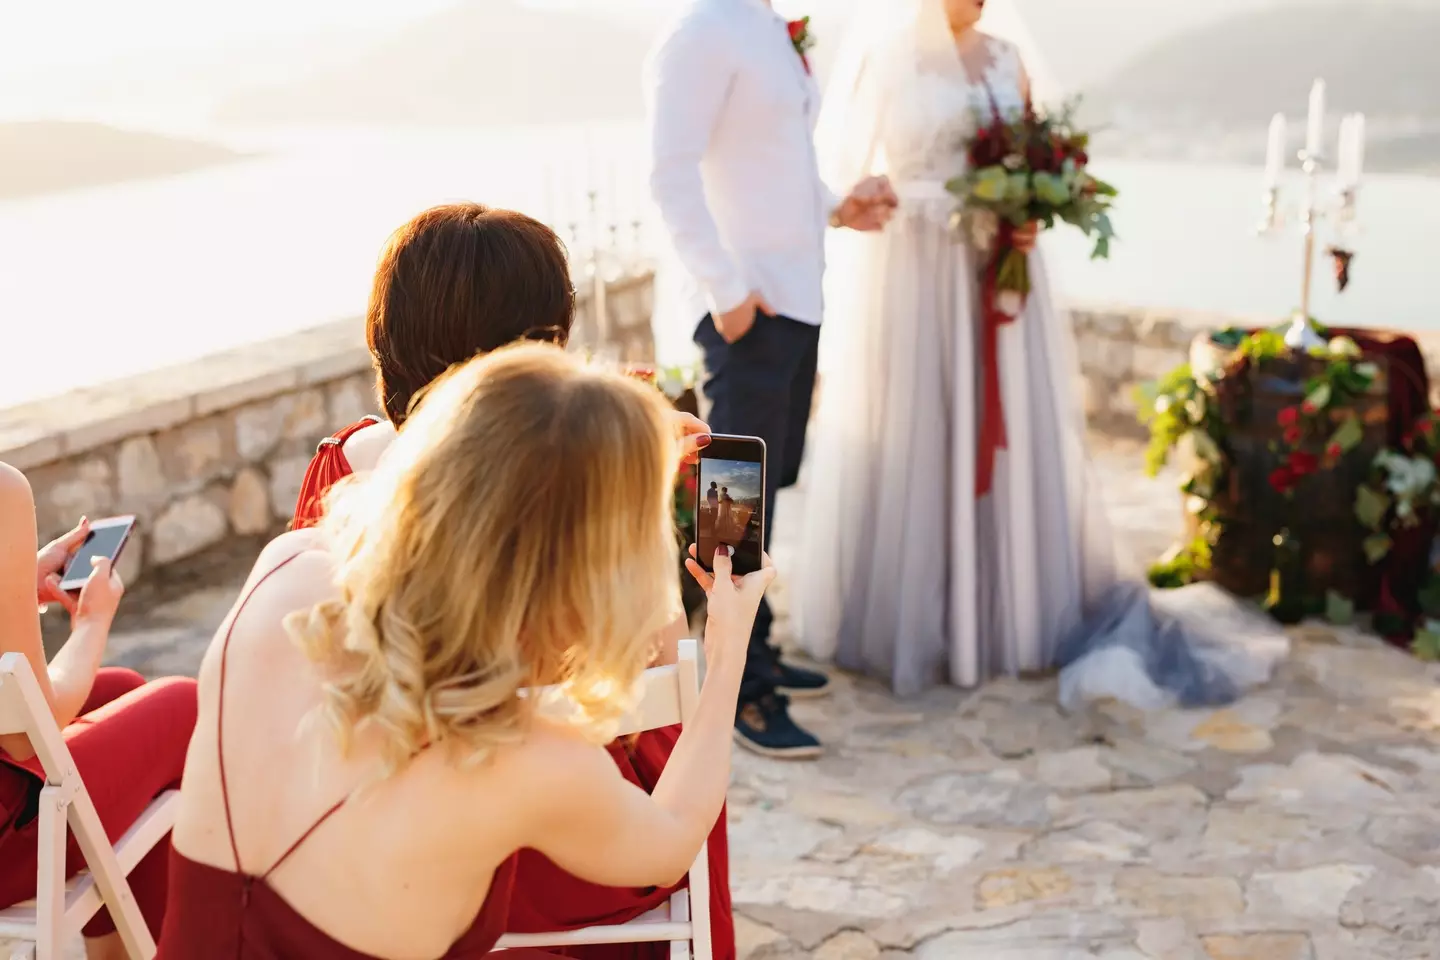 Guests are banned from filming during the ceremony (